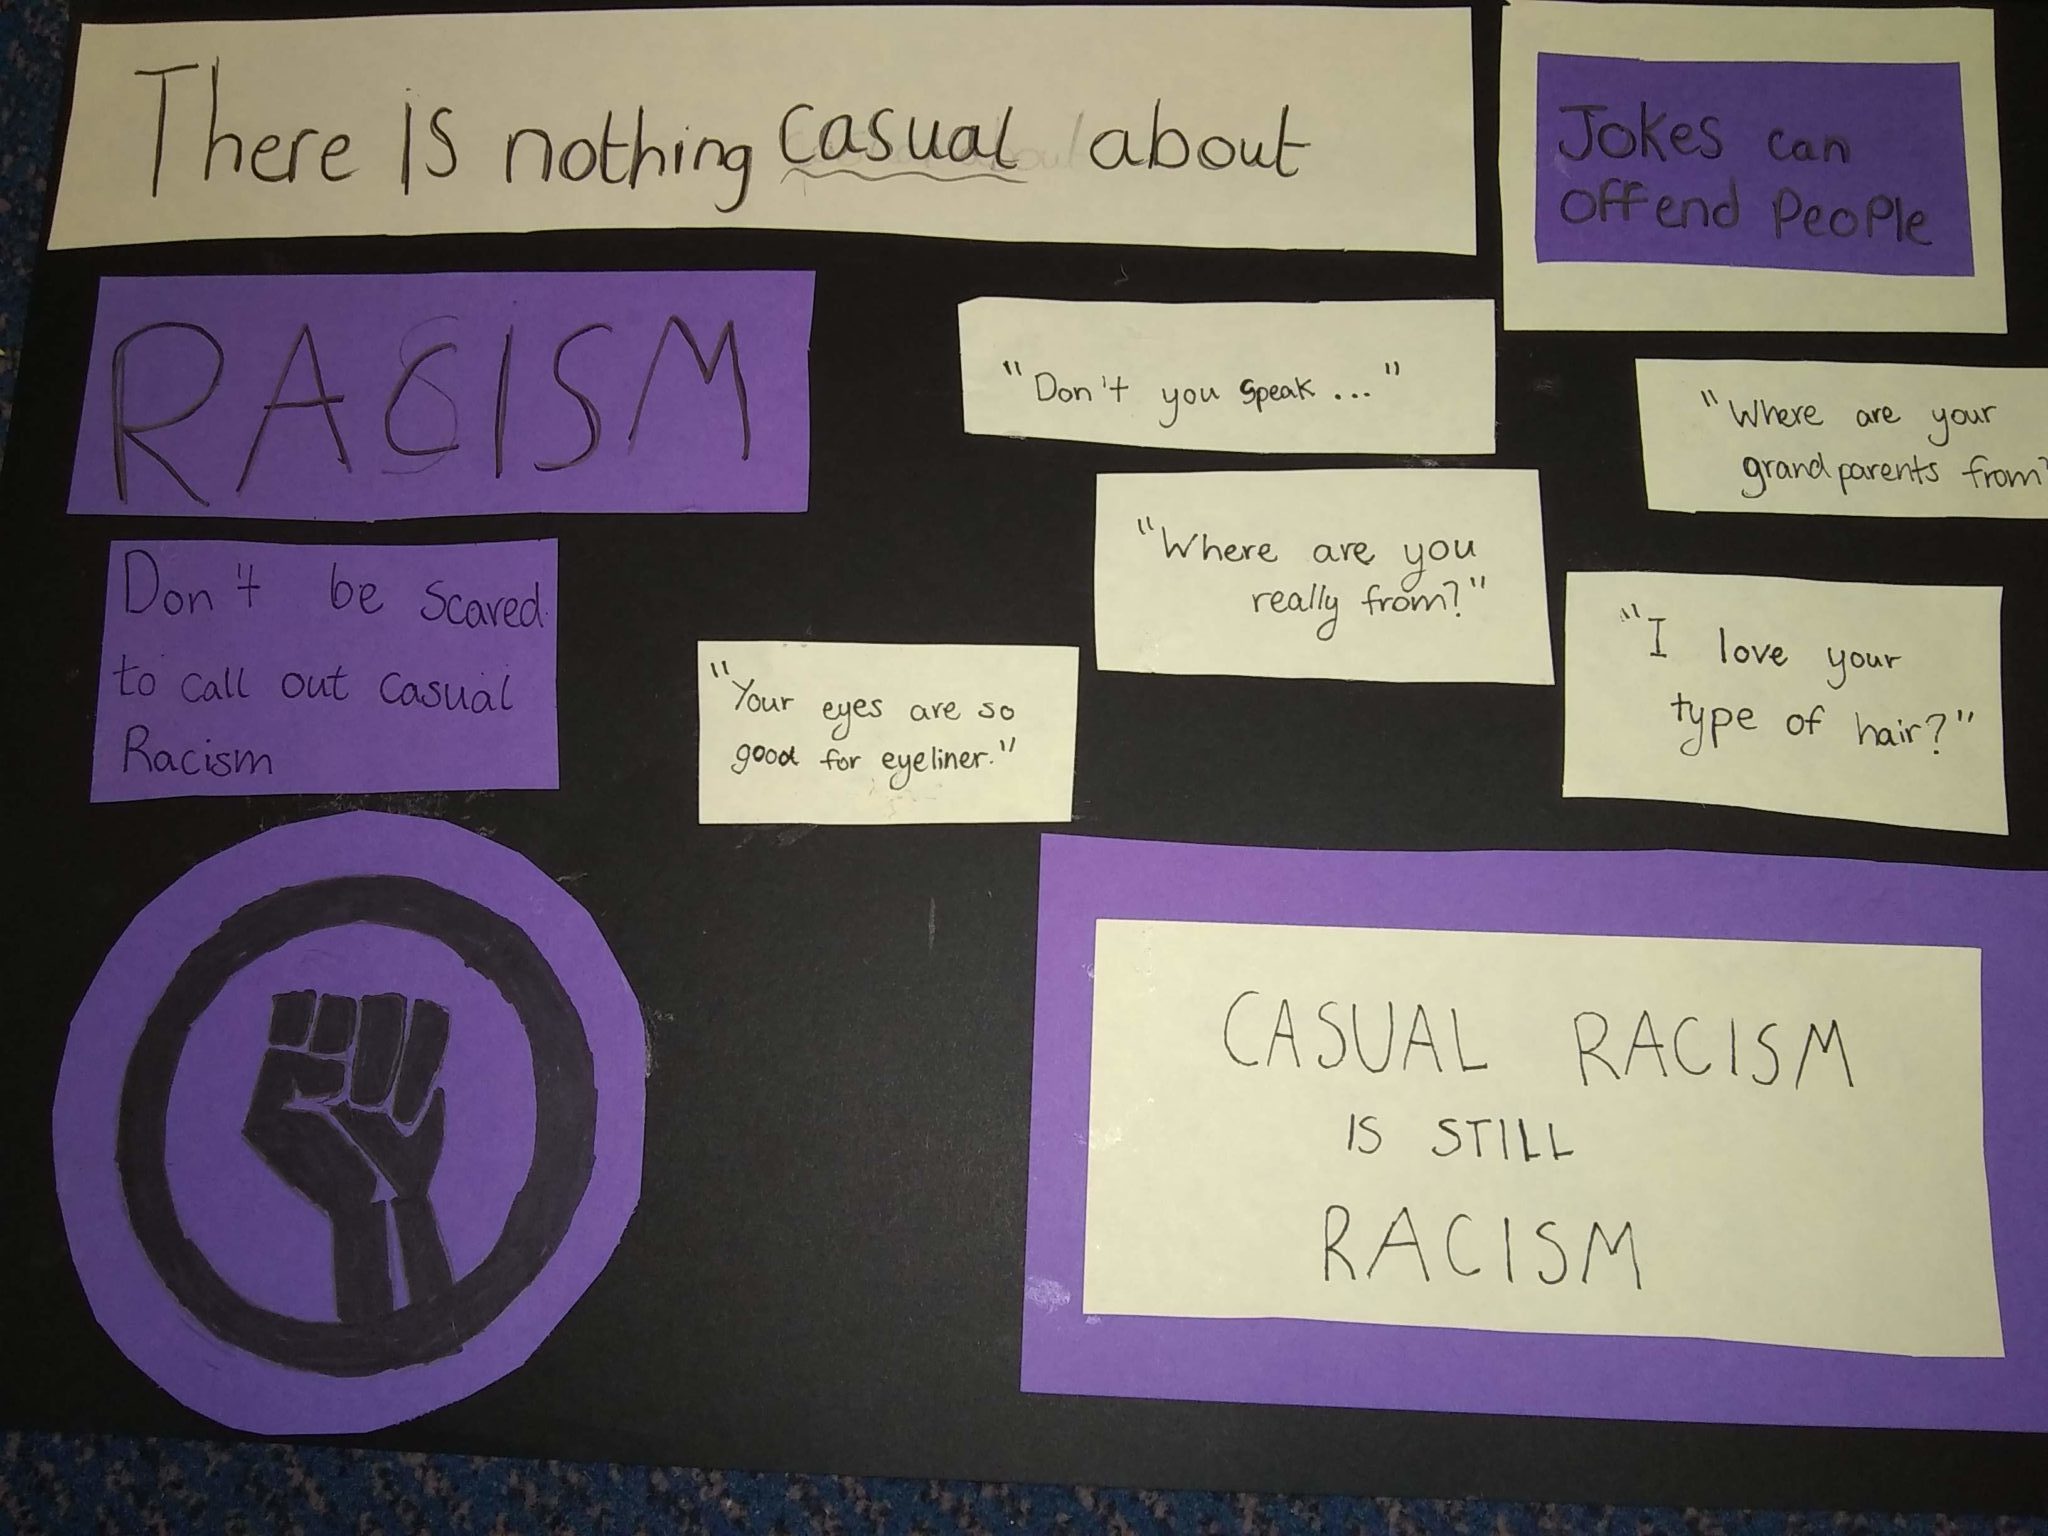 Poster against casual racism